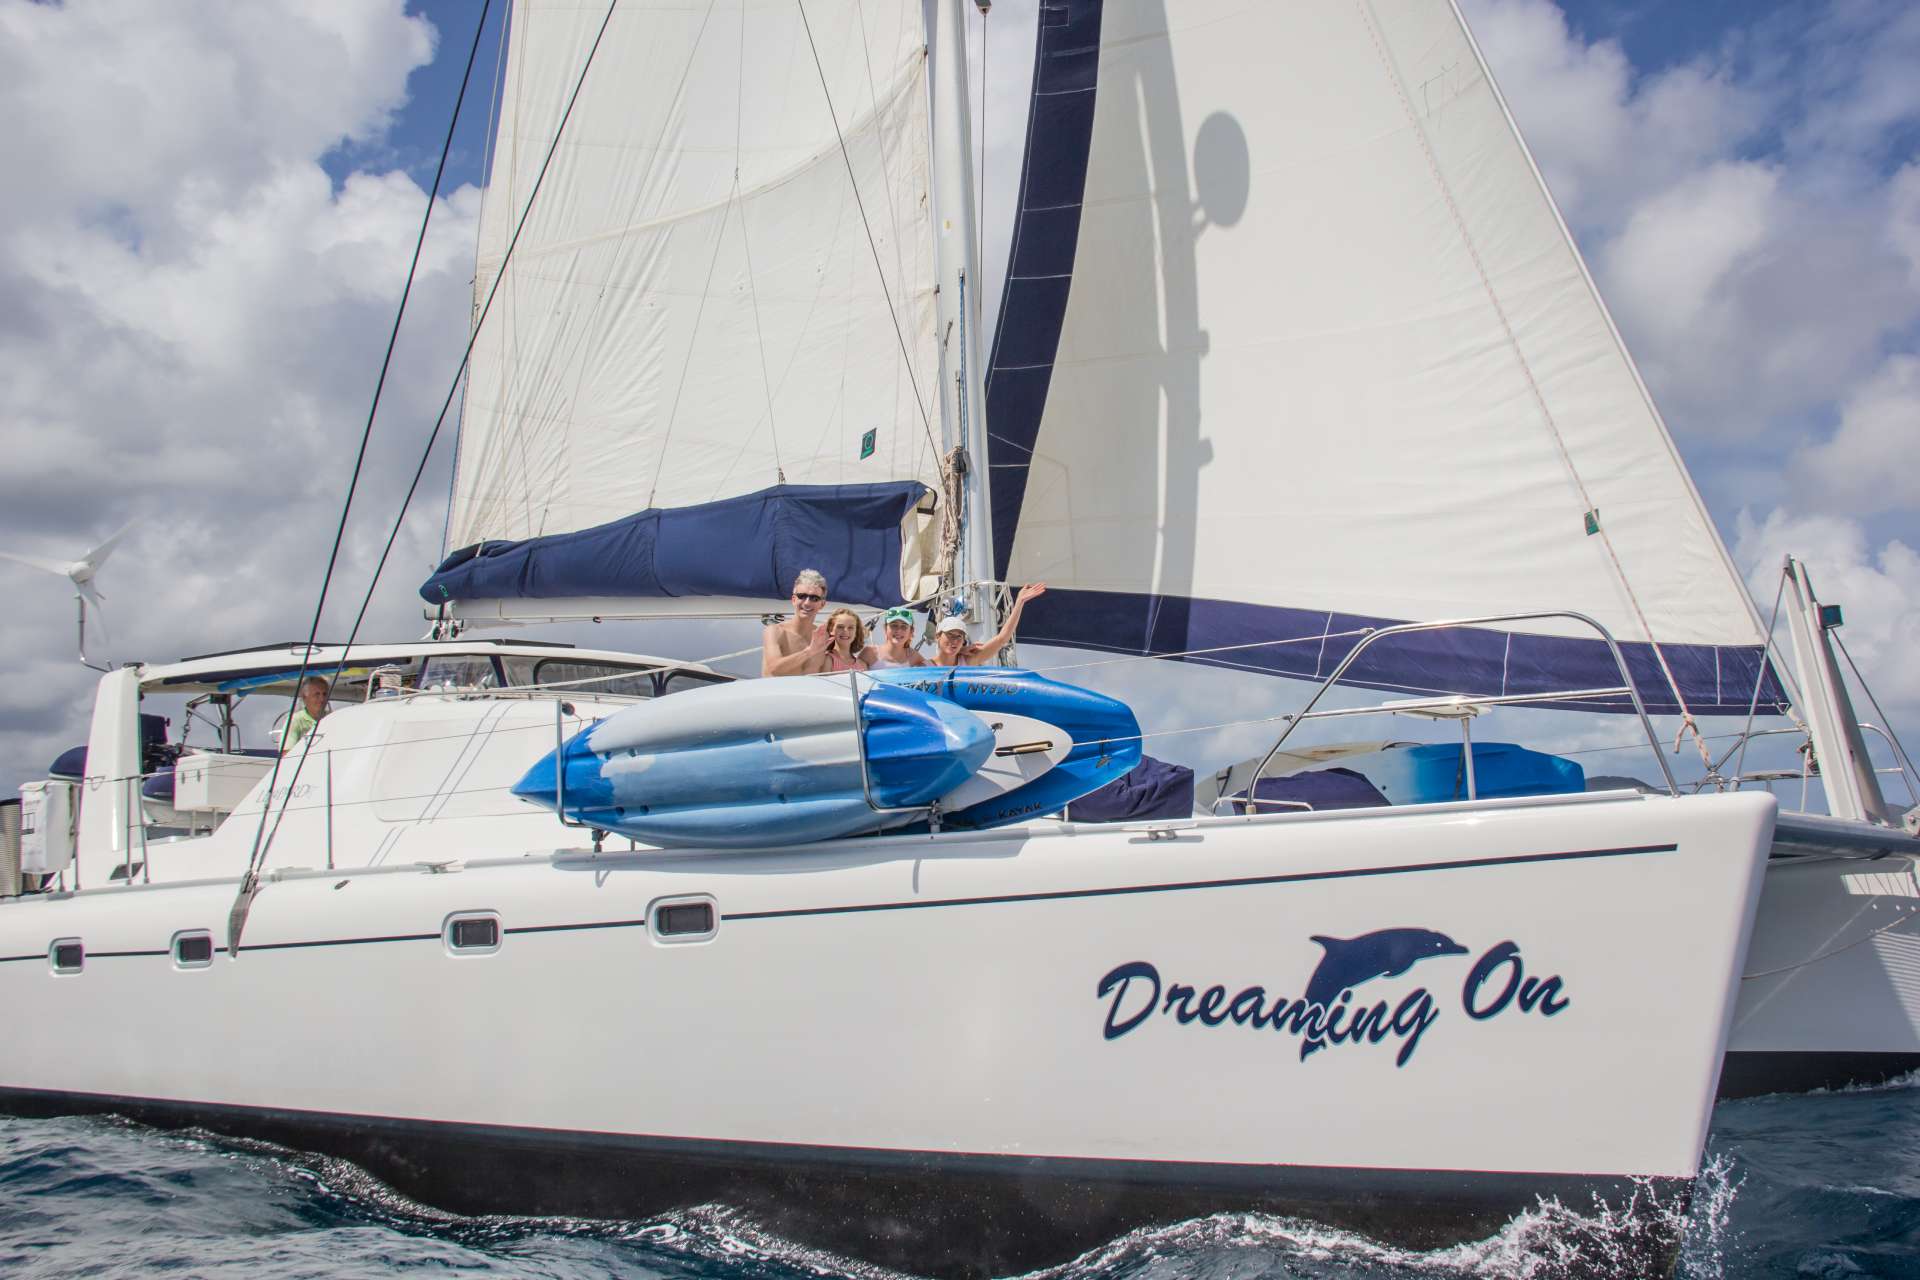 dreaming on - Catamaran Charter St Vincent & Boat hire in Central america, Belize 2